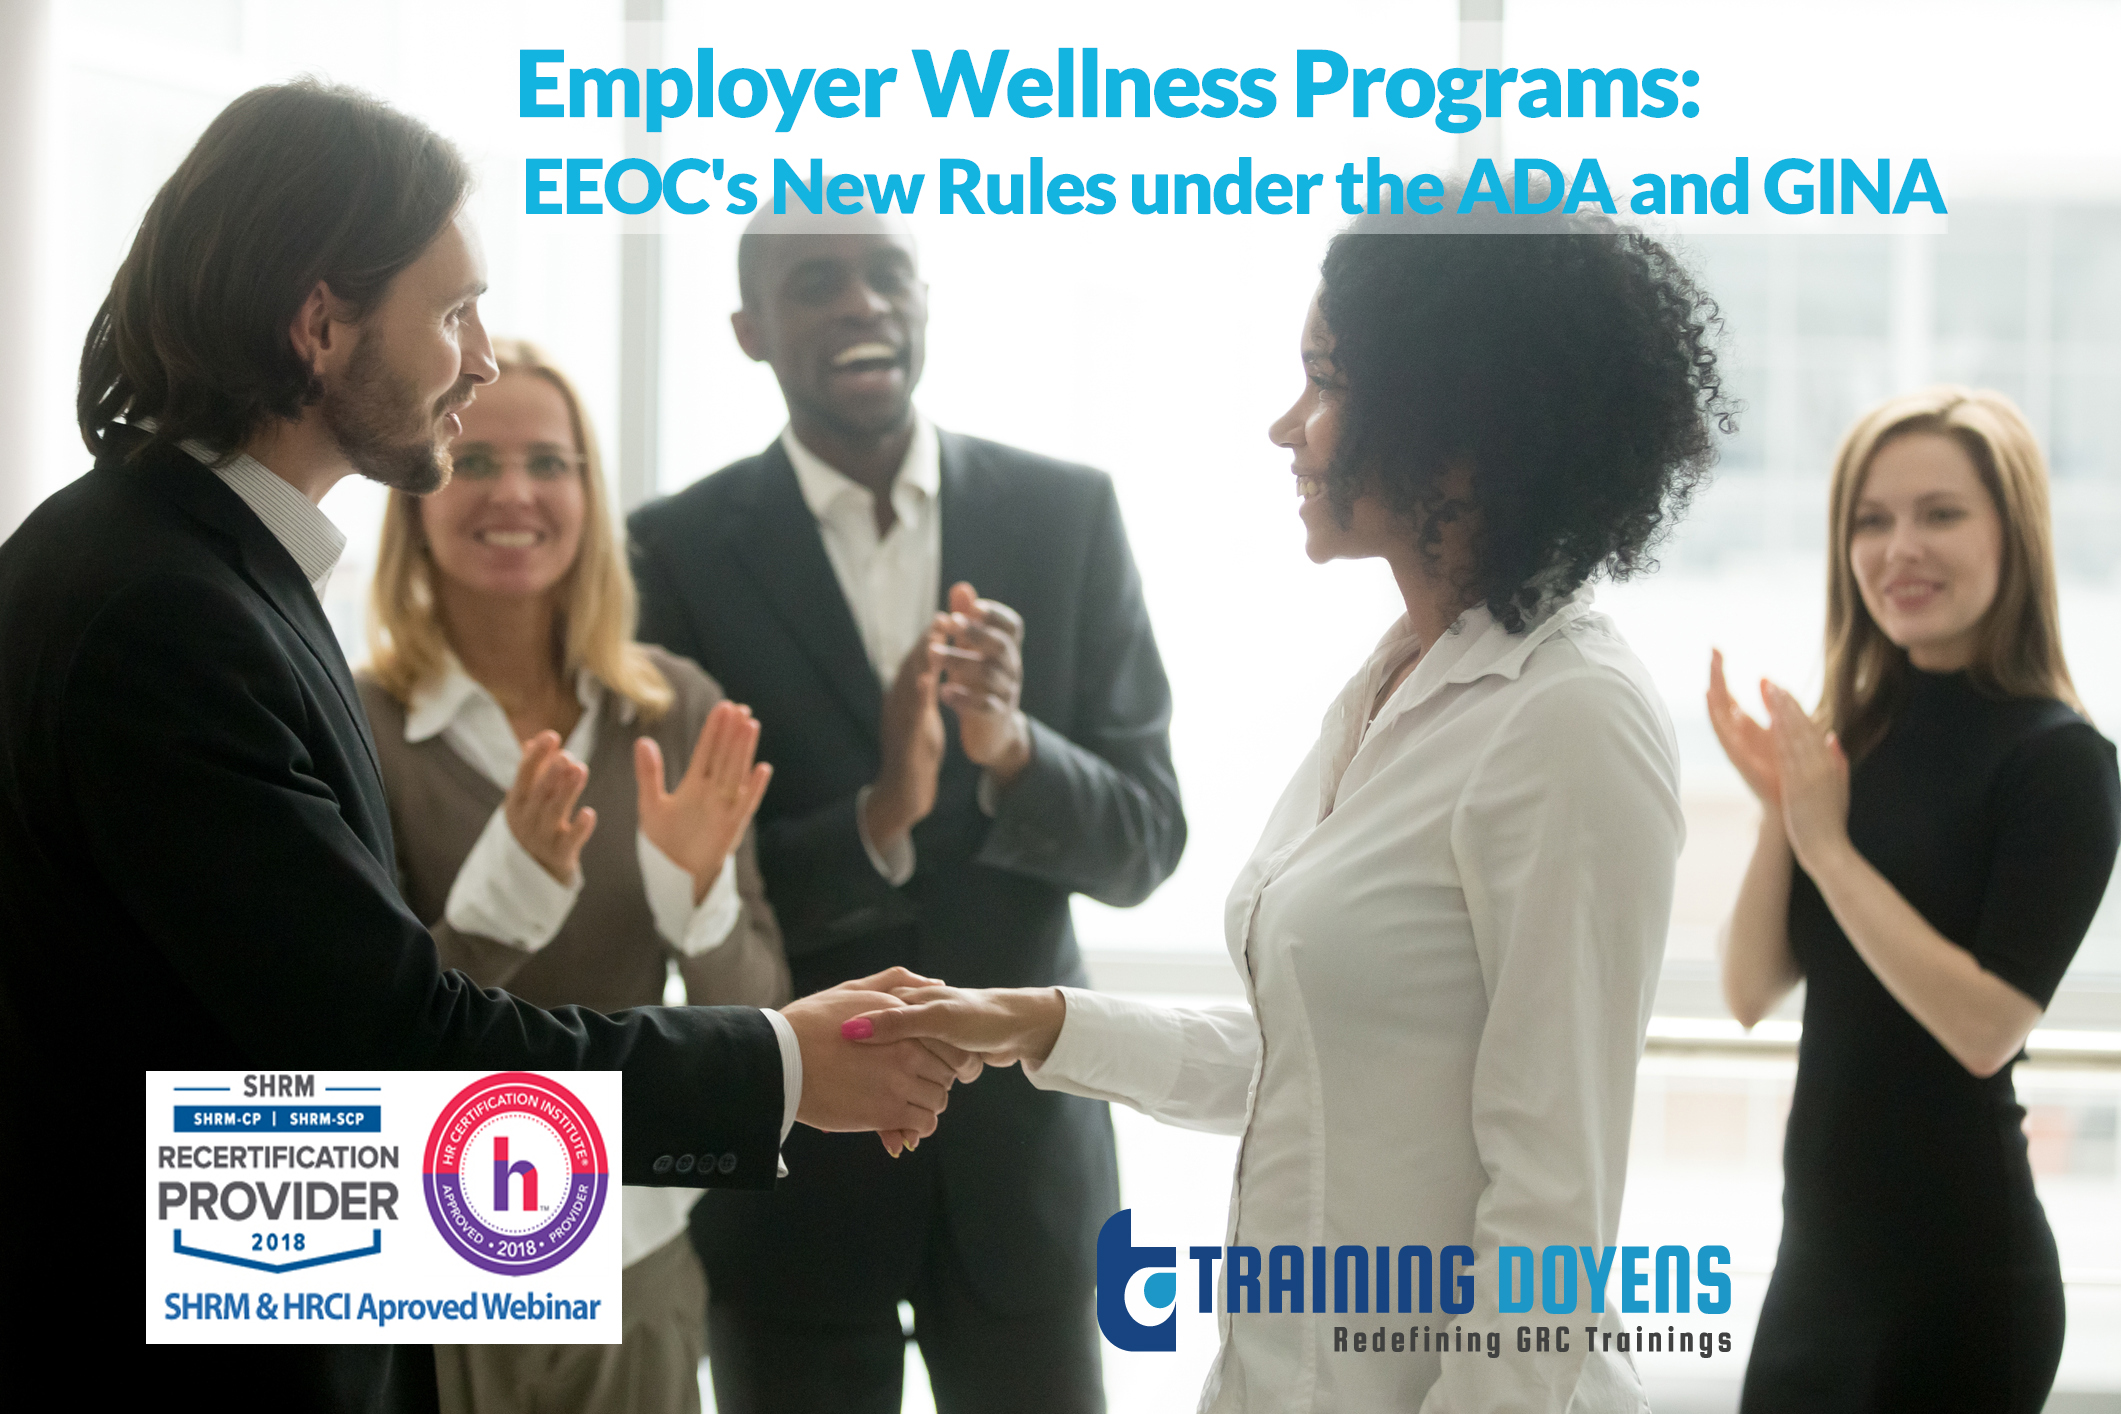 Employer Wellness Programs 101: EEOC's New Rules Under the ADA and GINA, ACA, HIPAA Requirements, Title VII and More., Aurora, Colorado, United States